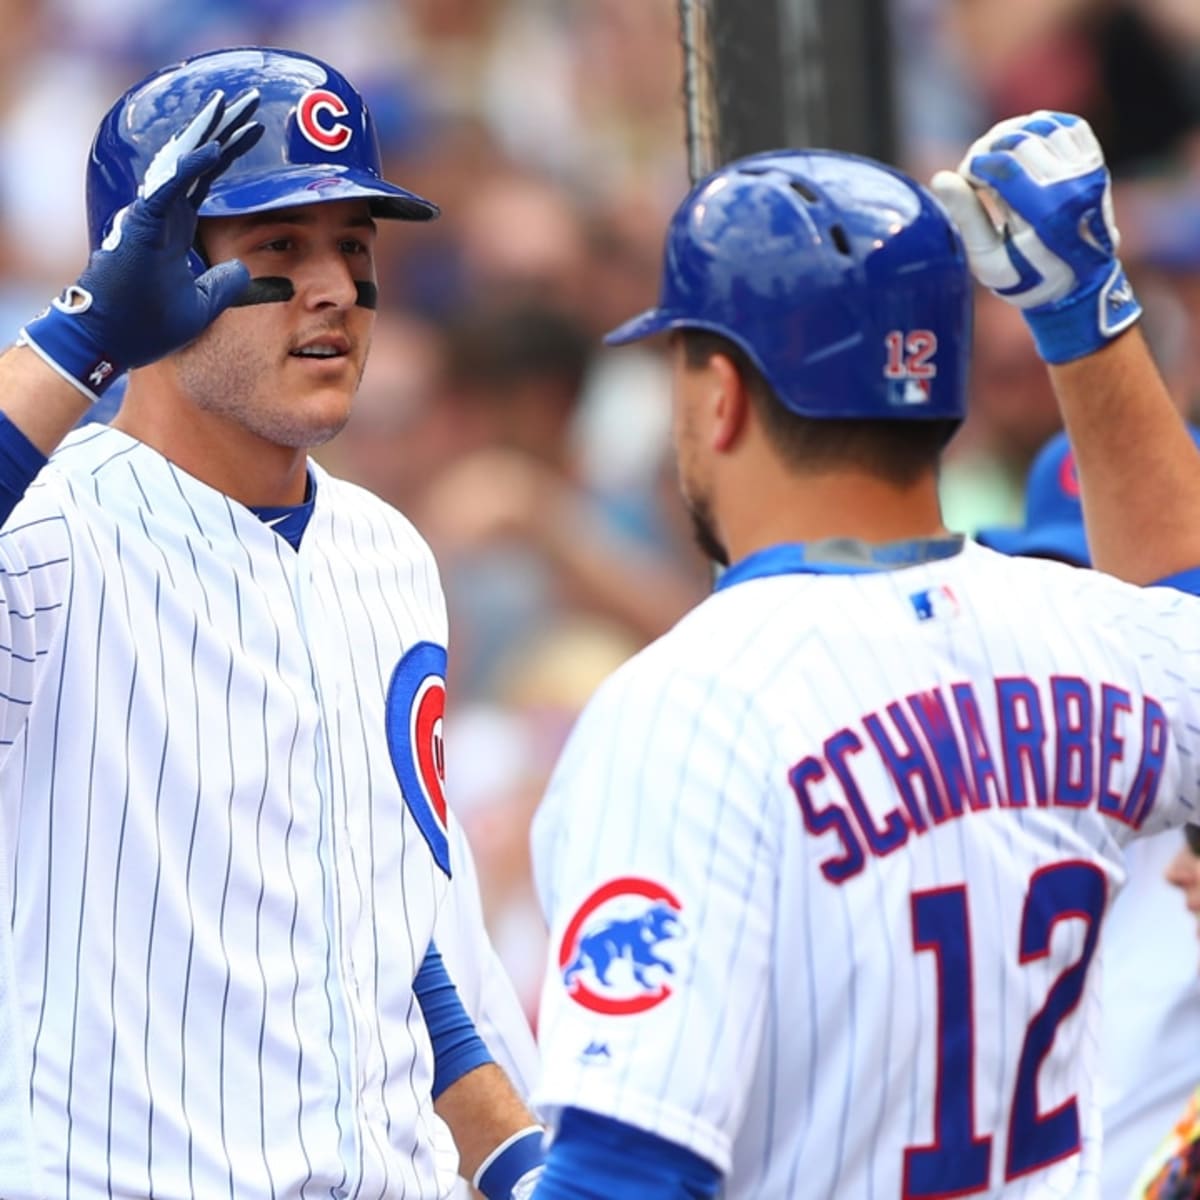 Cubs place Kyle Schwarber on World Series roster - ABC30 Fresno